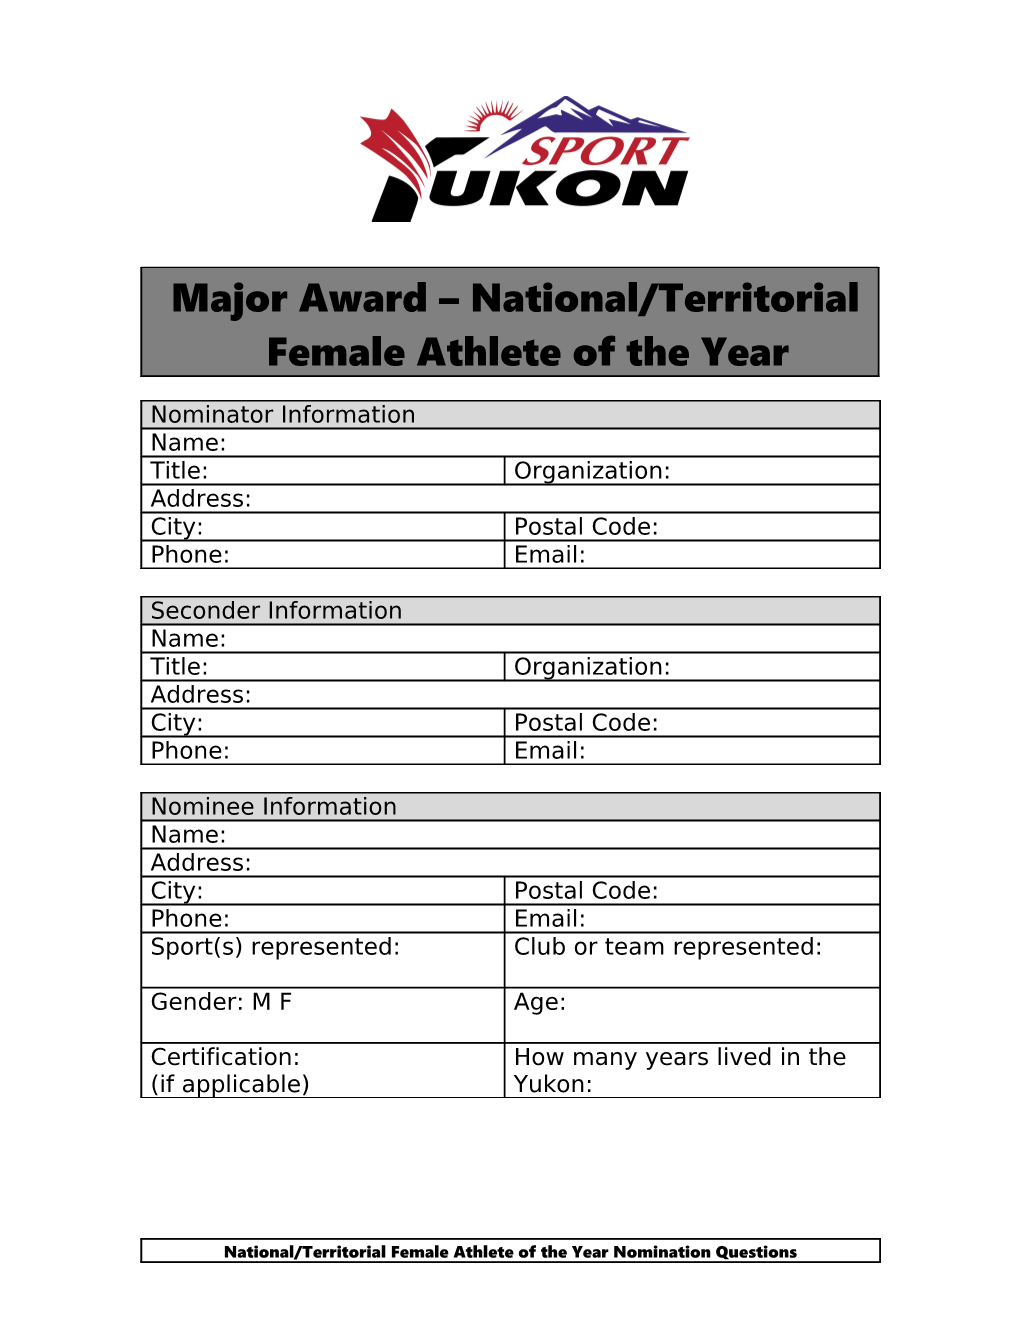 Major Award National/Territorial Female Athlete of the Year